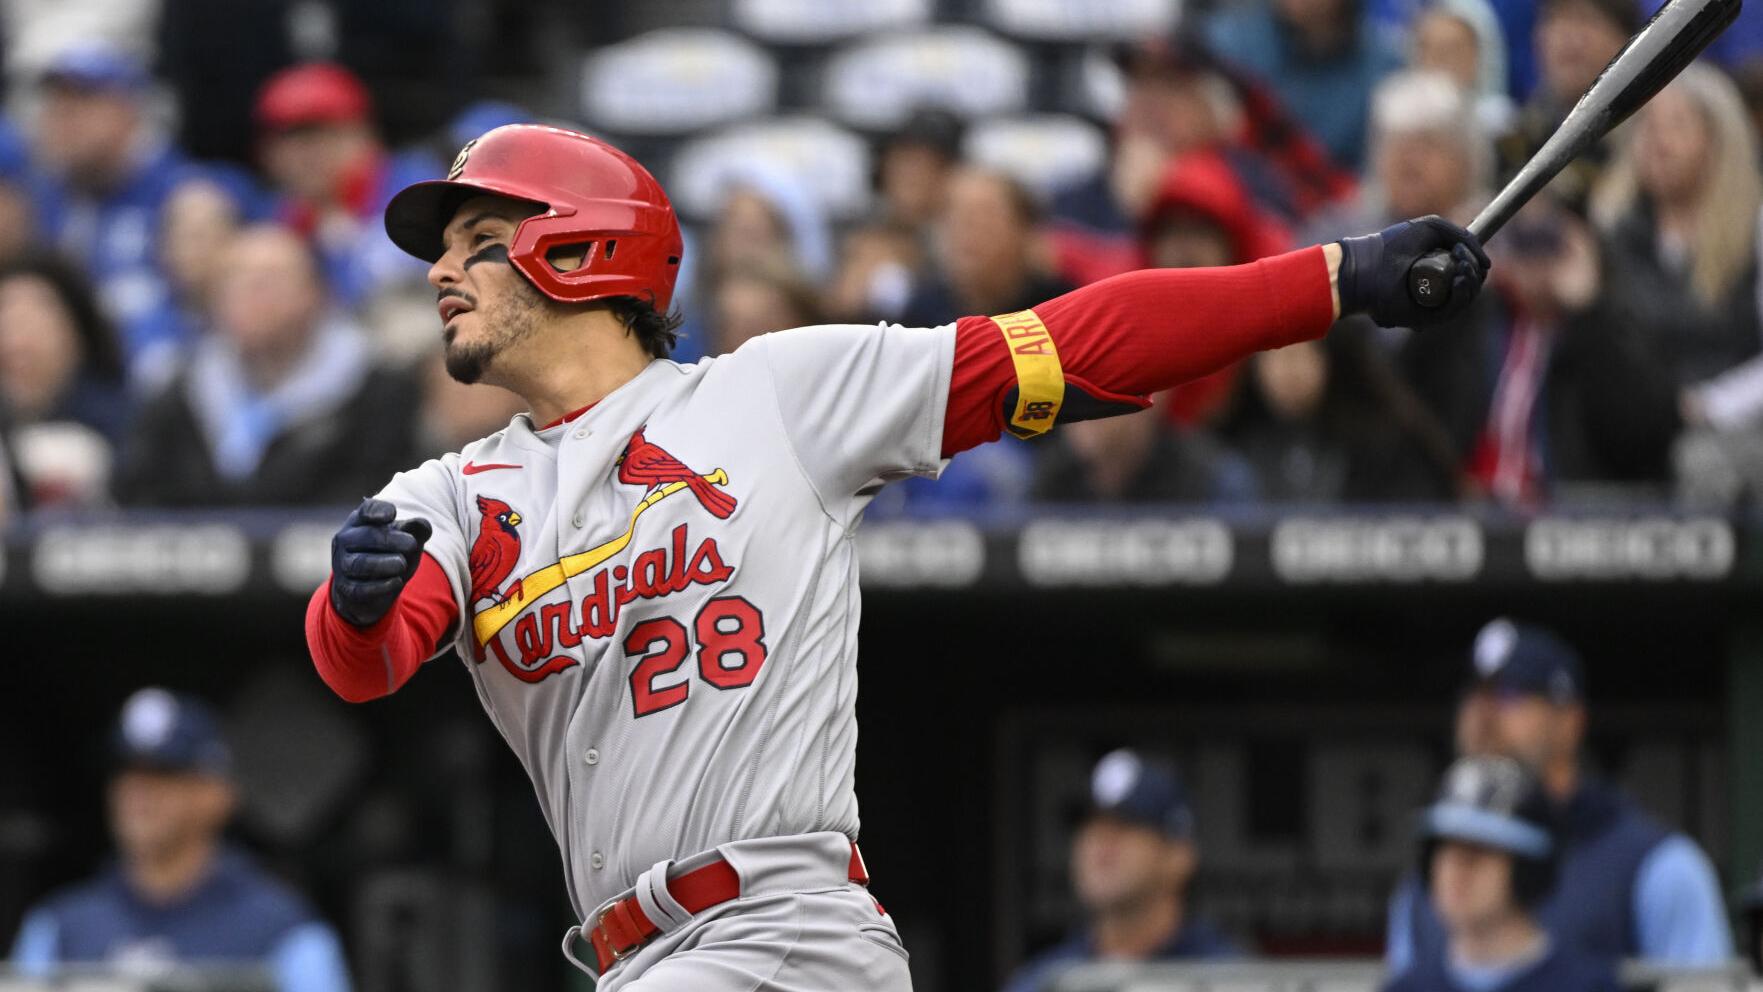 Arenado stakes Wainwright; Cardinals ace flushes Royals on one hit for seven innings